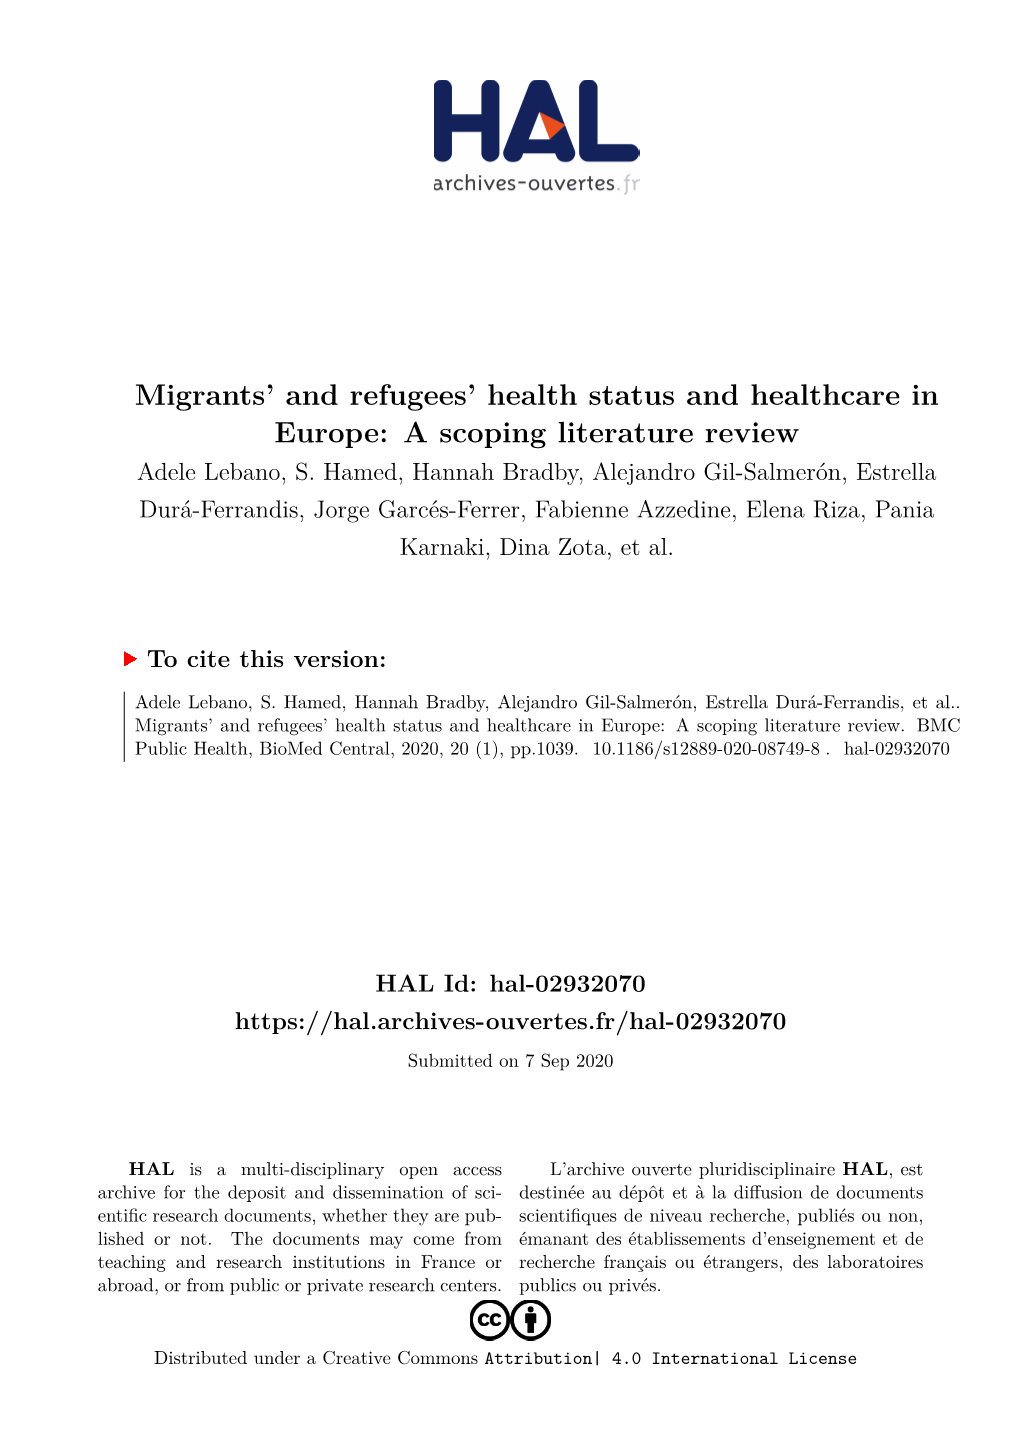 Migrants' and Refugees' Health Status and Healthcare in Europe: a Scoping Literature Review